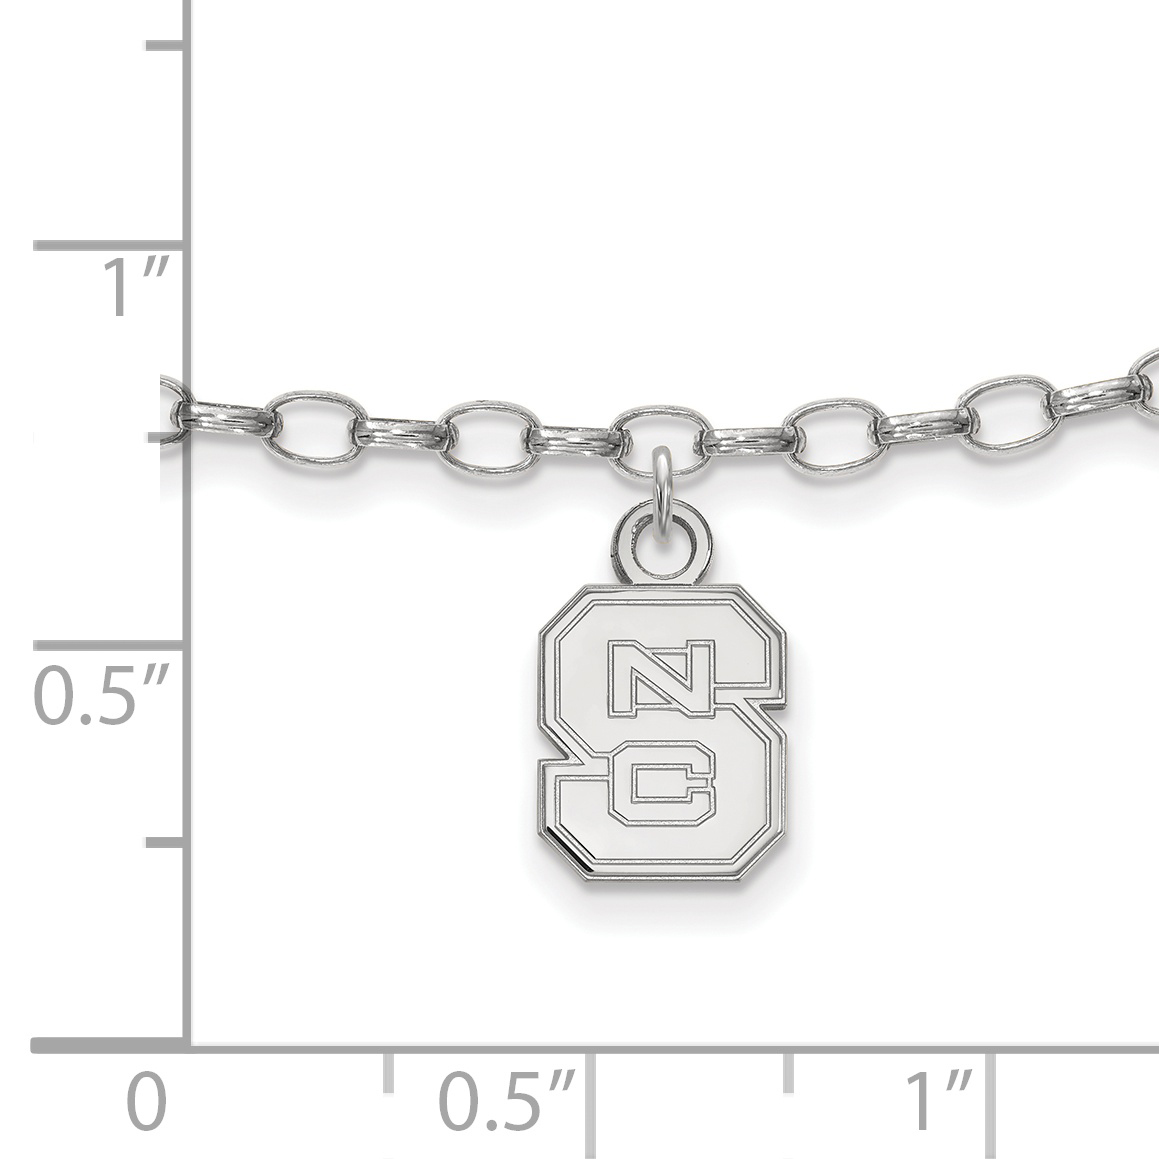 LogoArt Sterling Silver Rhodium-plated North Carolina State University Anklet - image 2 of 5